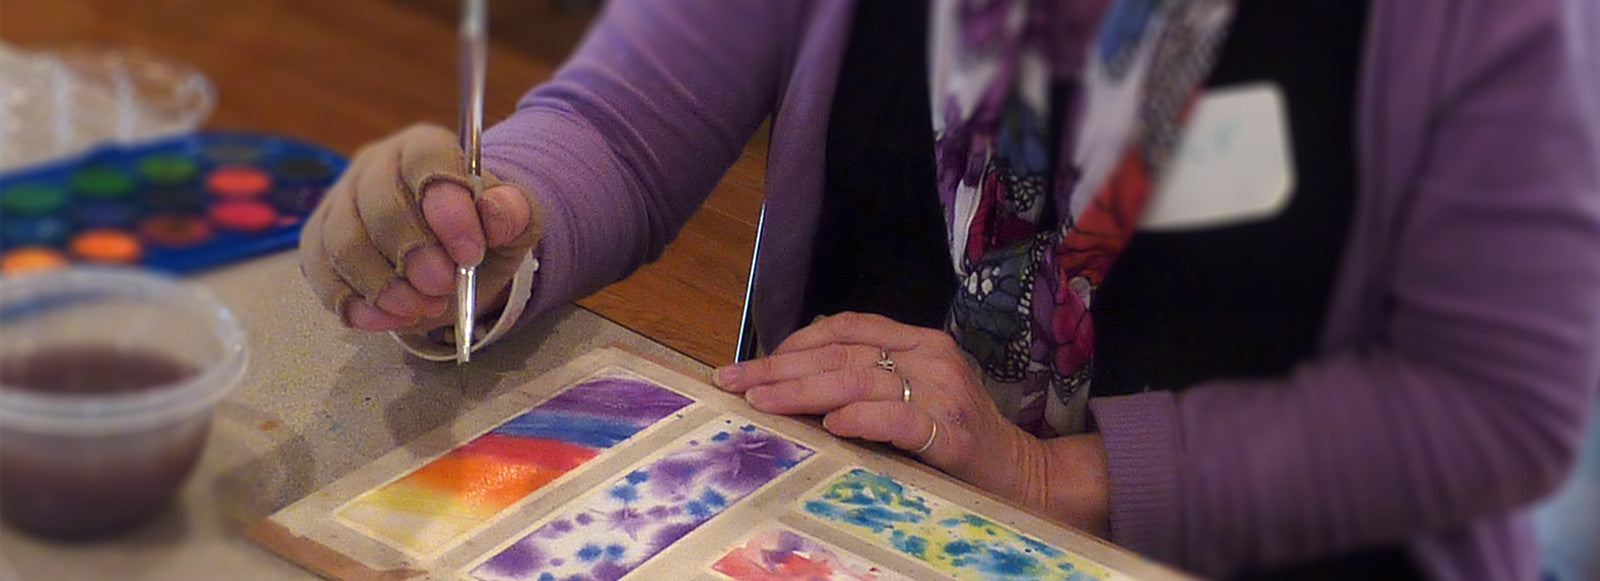 Helping people cope with cancer through self-expression and creativity...